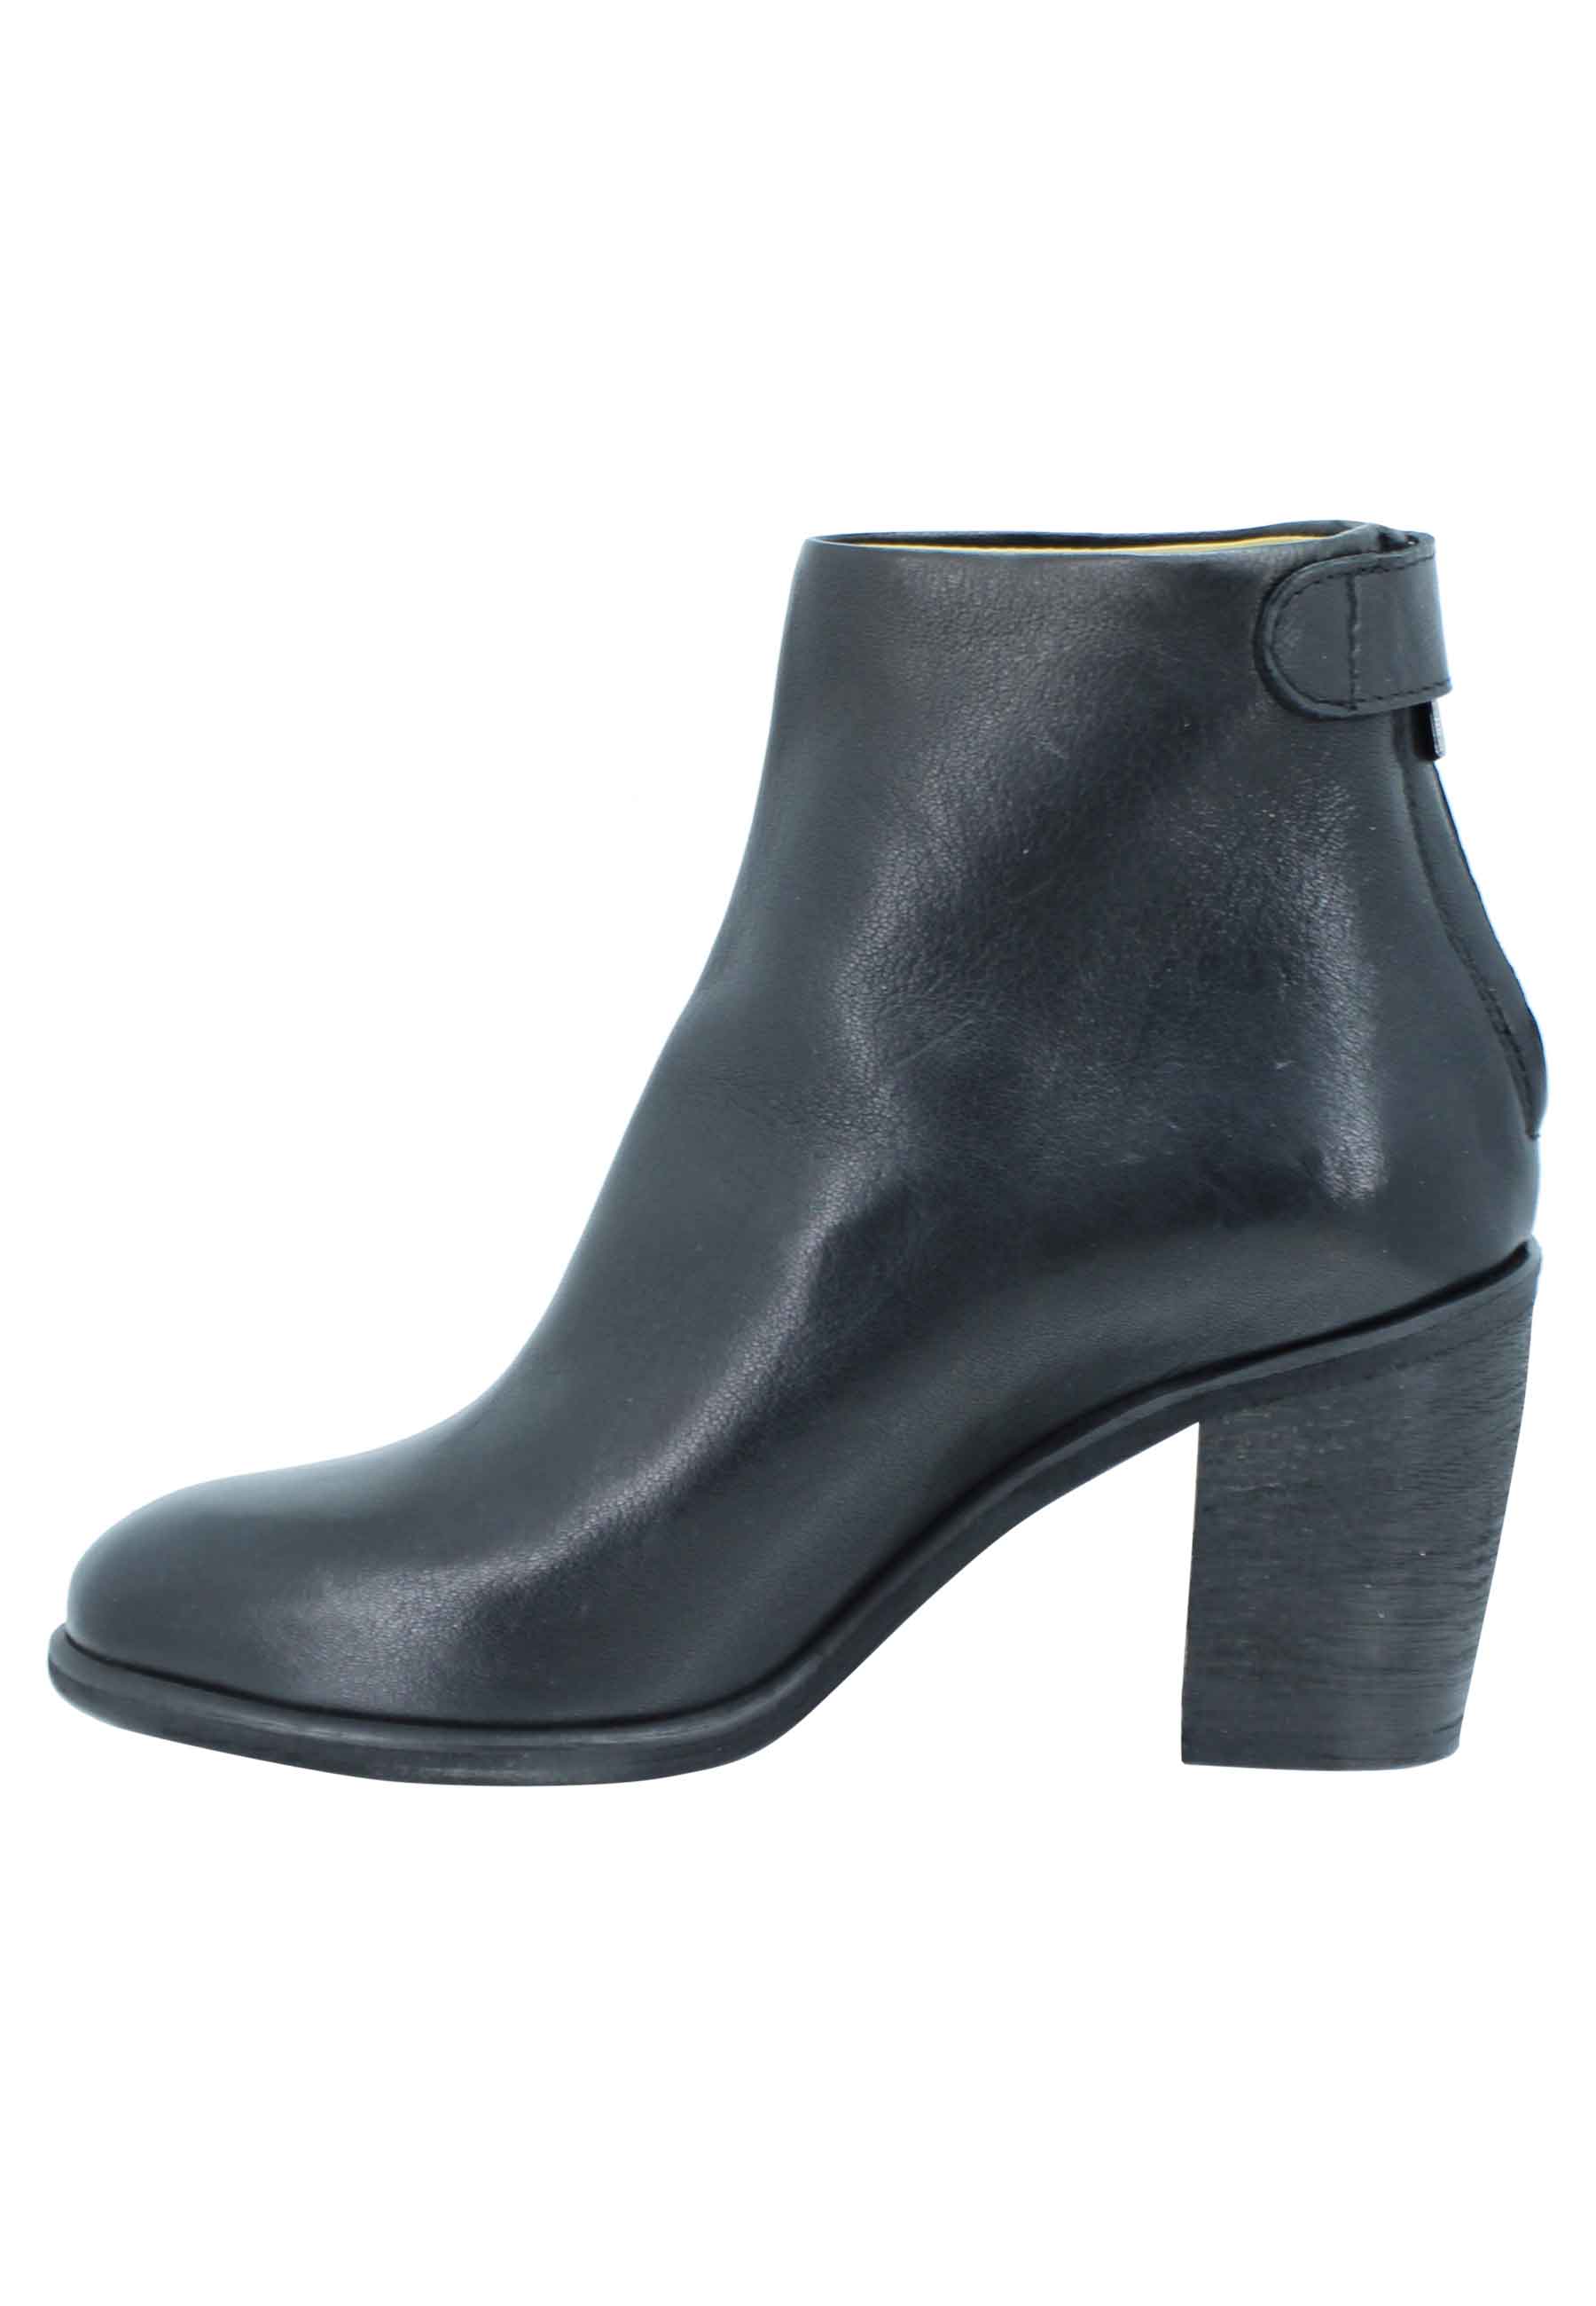 Women's black leather high heel ankle boots with back zip